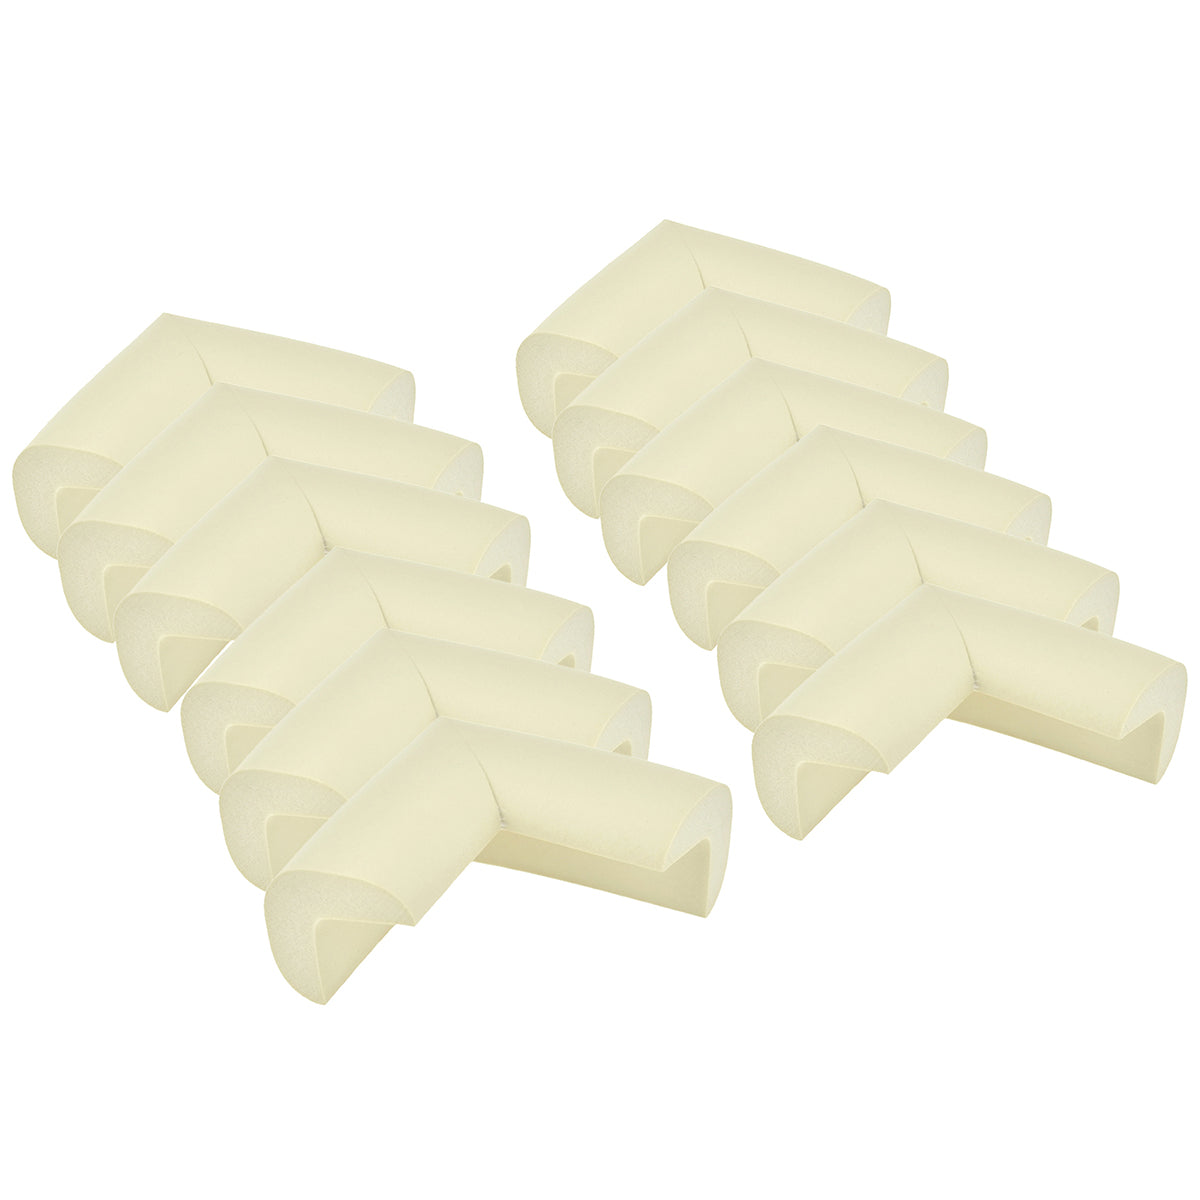 2 rows of 6 pieces neatly placed beige l-shaped foam corner protectors show with a white background.